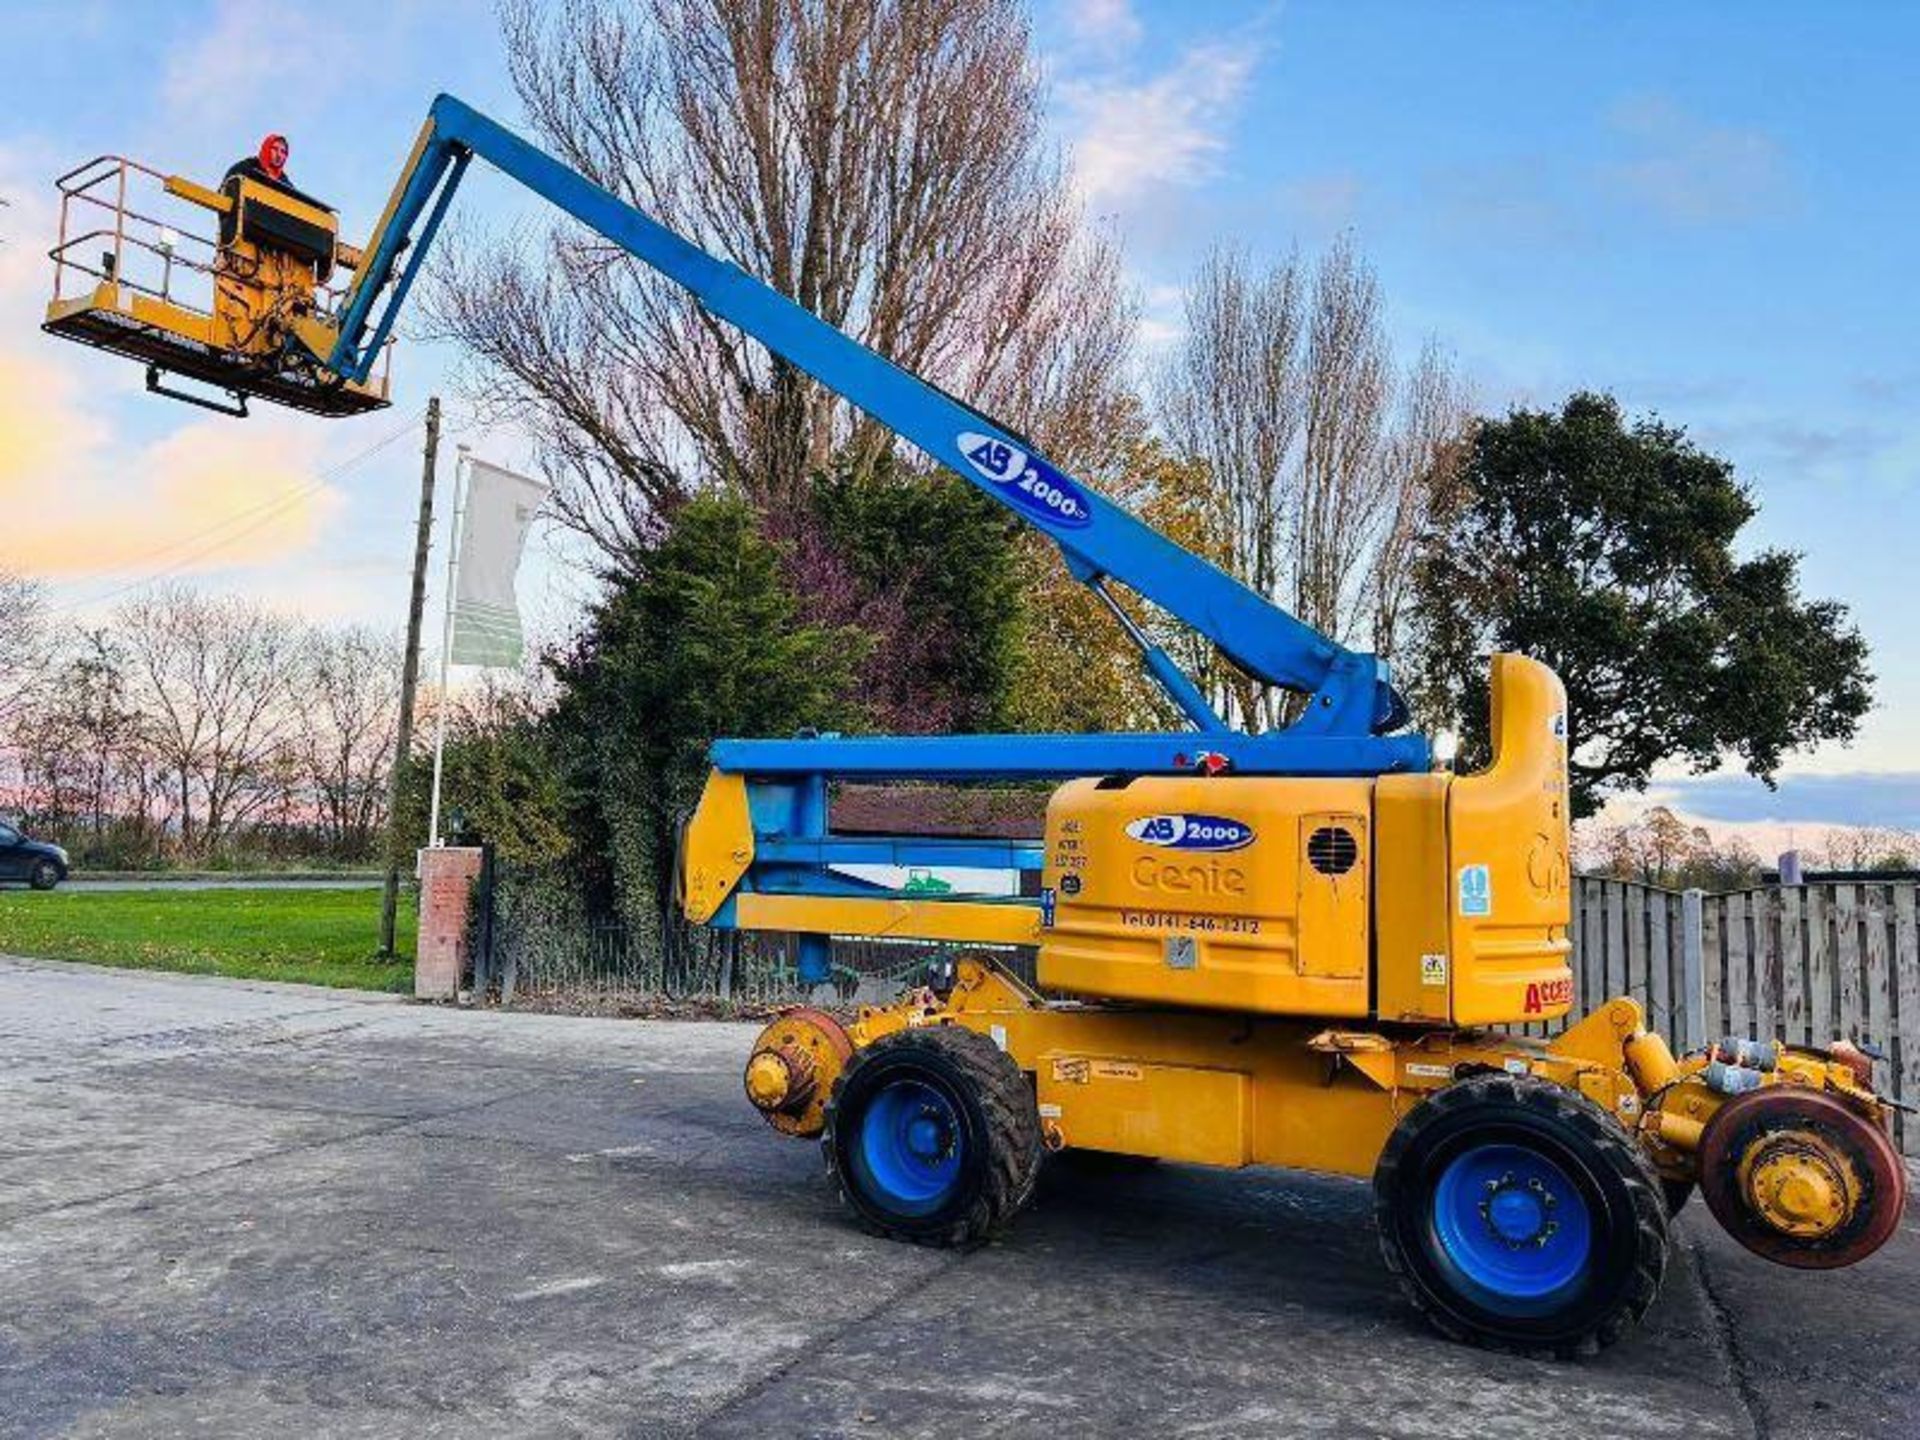 GENIE Z-60/34 4WD ARTICULATED RAIL ROAD BOOM LIFT * 20.3 METER REACH * - Image 3 of 15